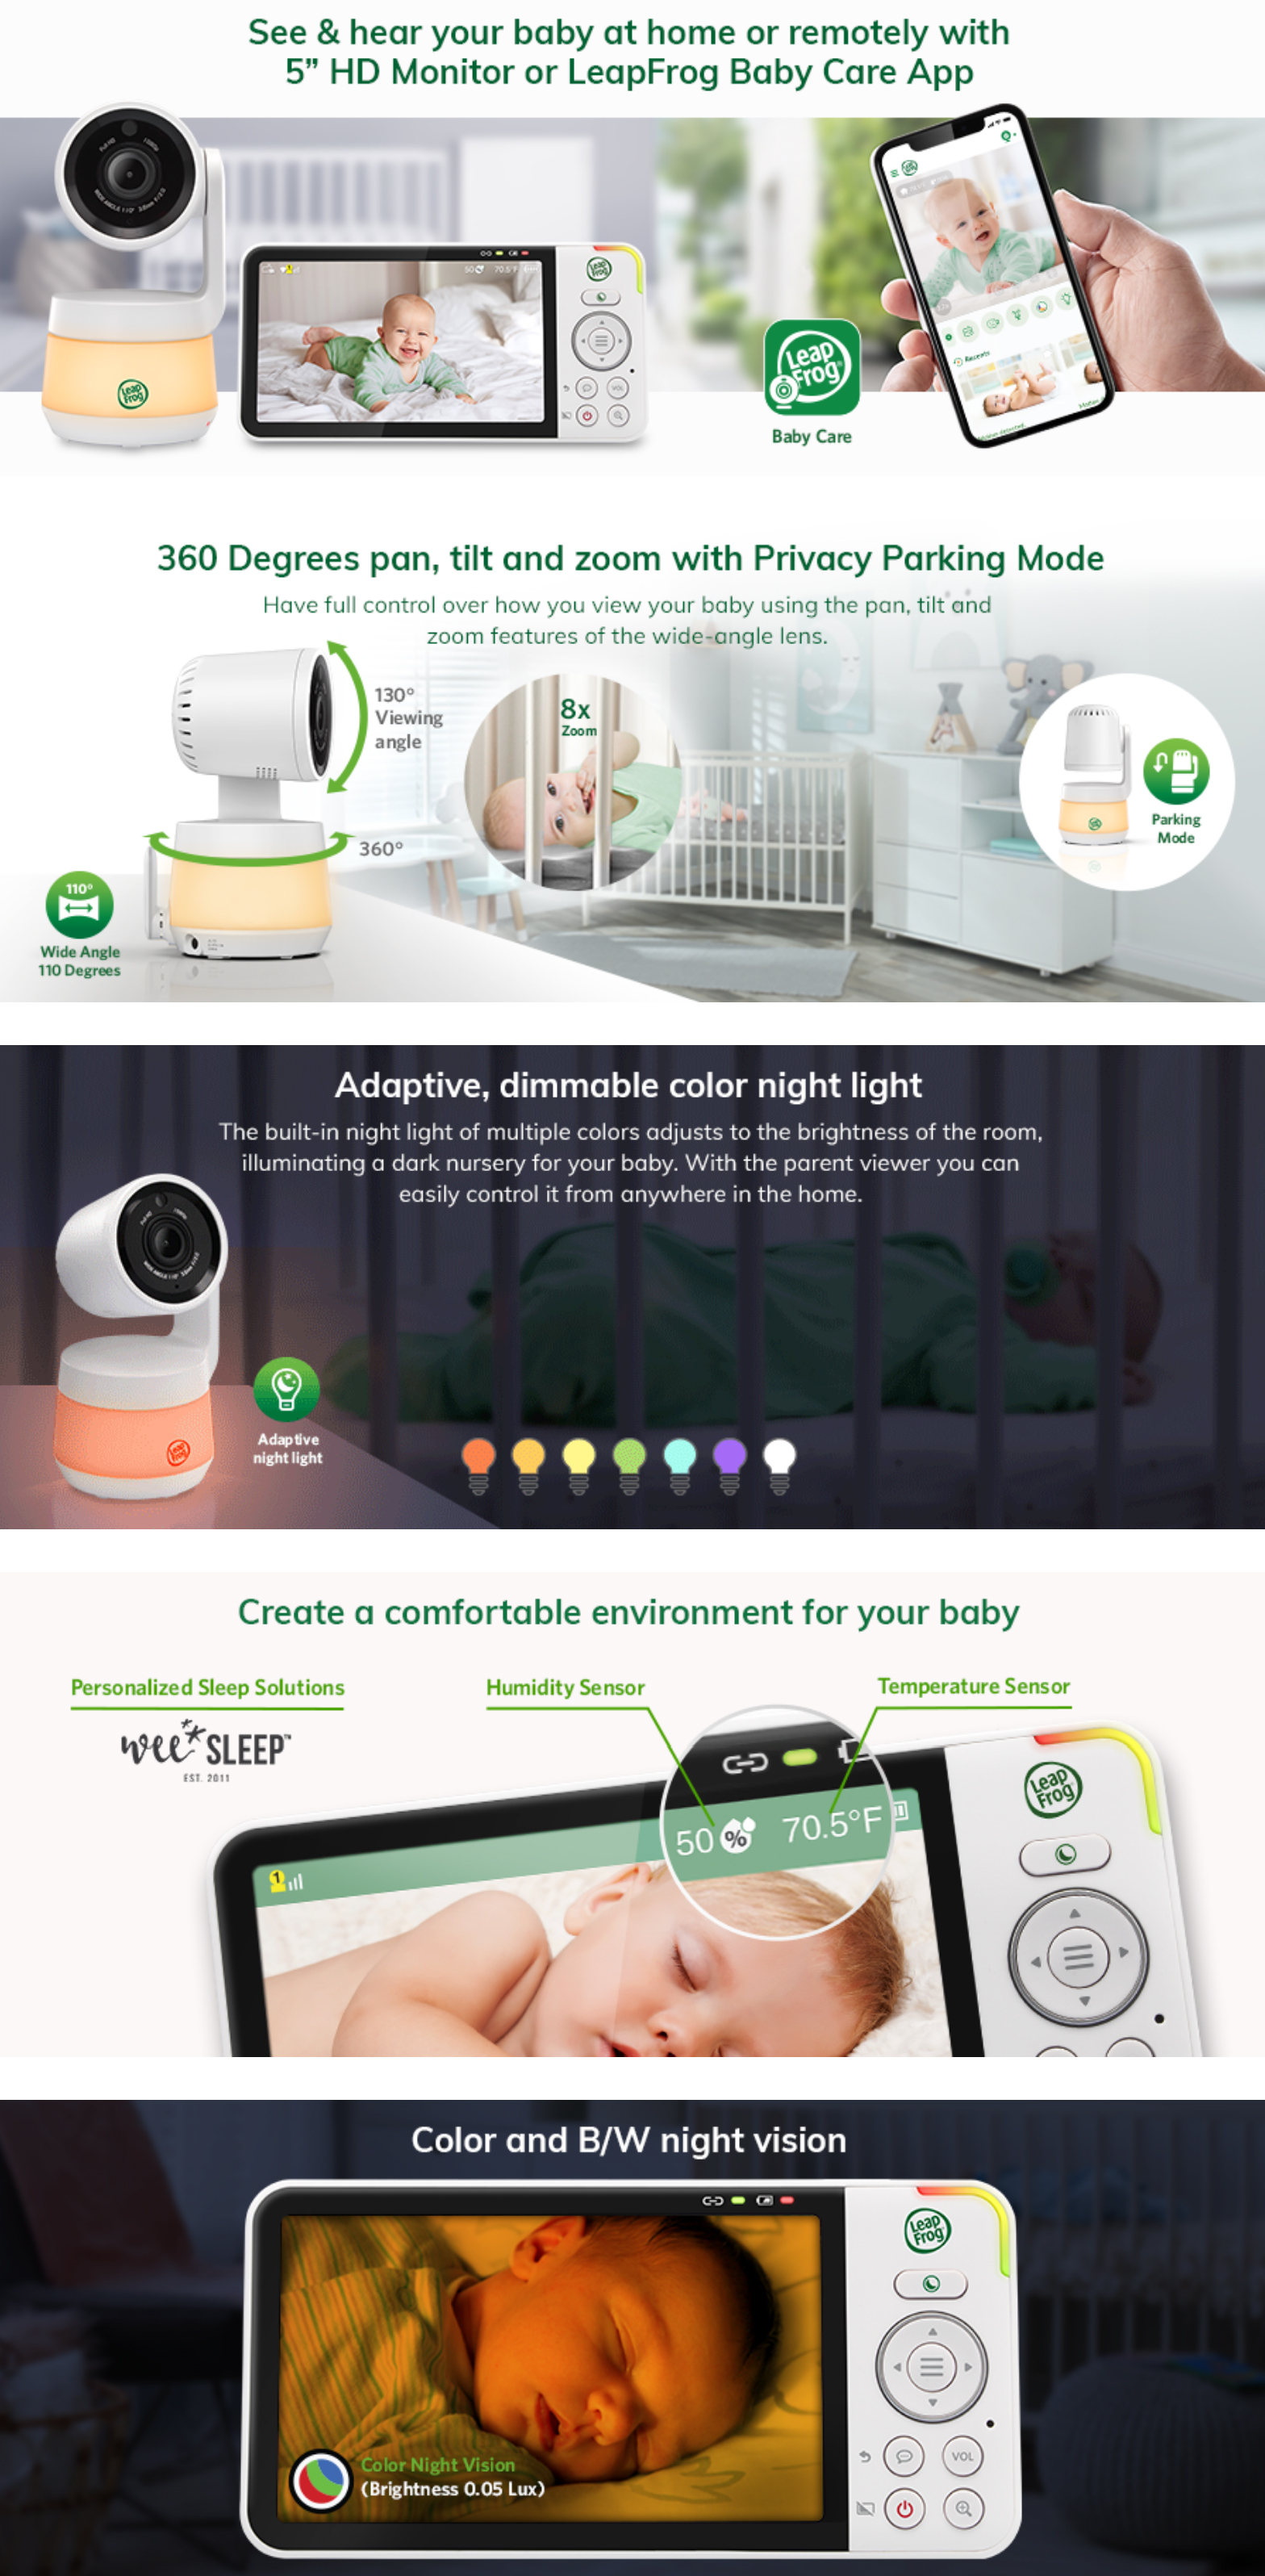 Baby-Monitors-LeapFrog-LF925HD-HD-Pan-and-Tilt-with-Remote-Access-Baby-Monitor-1